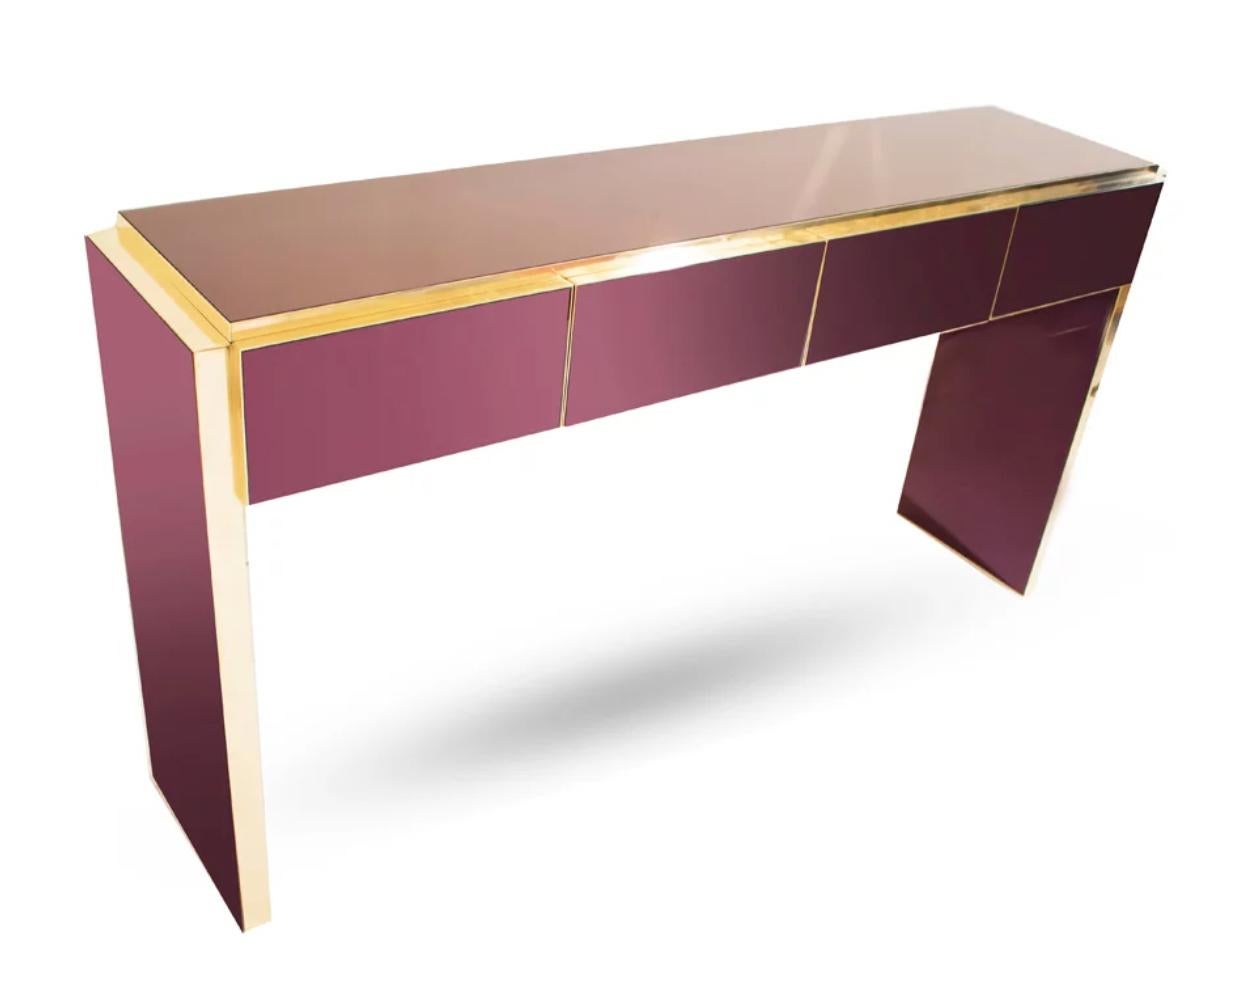 Contemporary Bespoke customizable 4-drawer modern console / sideboard, entirely handcrafted in Italy, with a minimalist Art Deco Design, the dramatic surround decorated with art glass in a striking unusual metallic wine color with a back note of